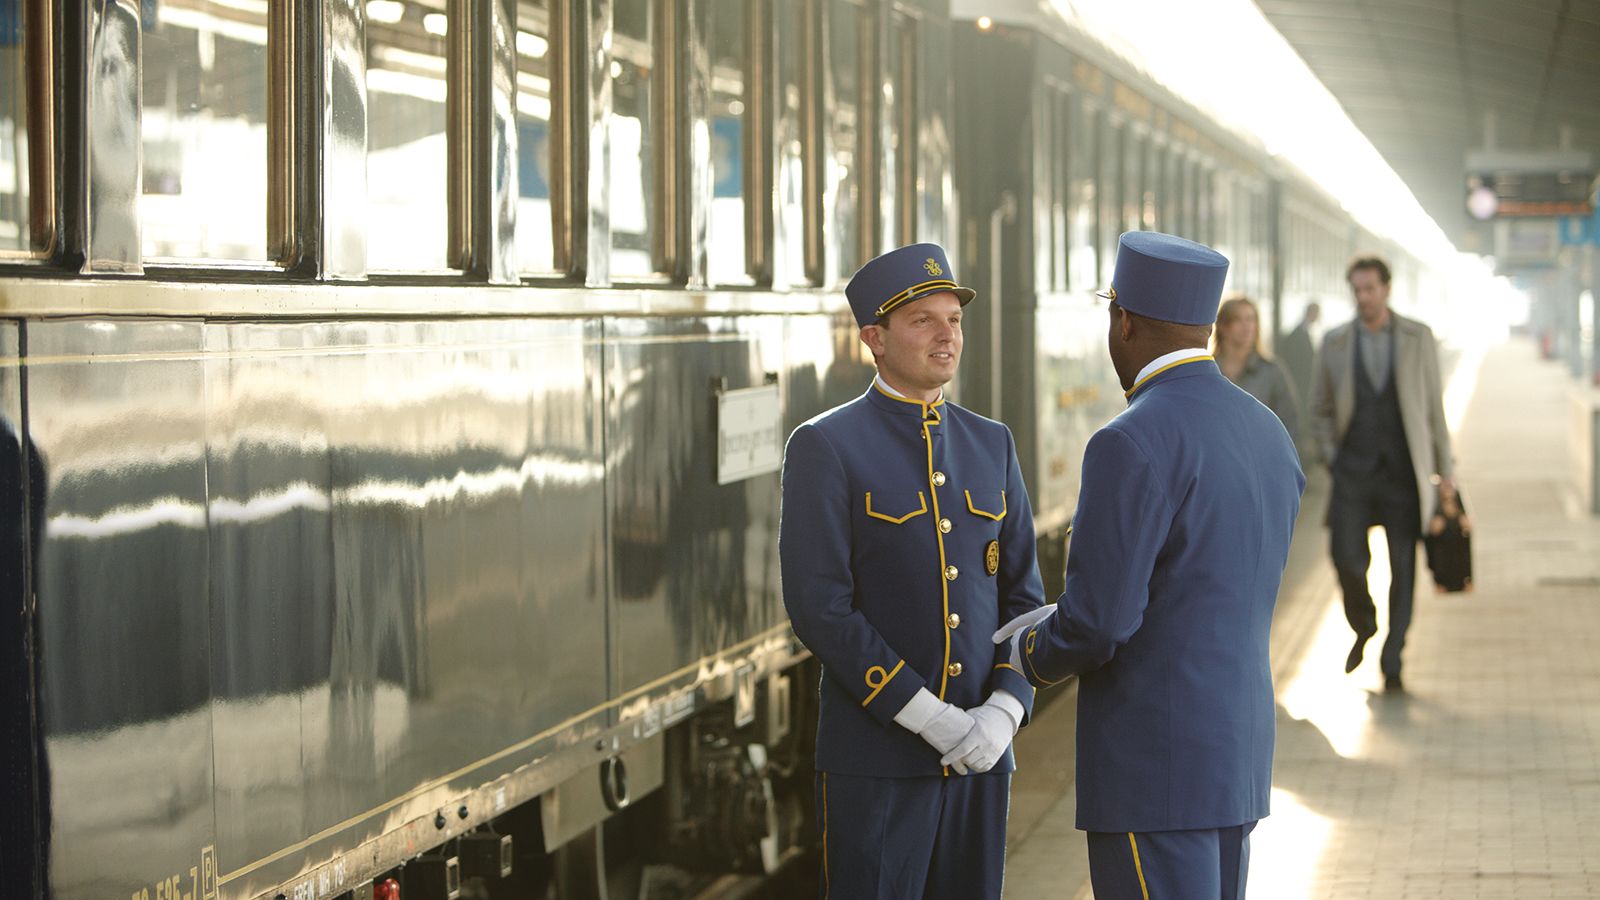 Belmond on X: The Restaurant Car of our Venice Simplon-Orient-Express,  Côte d'Azur, was built in 1929. Admire the stunning René Lalique glass as  you await your sumptuous meal aboard the world's most